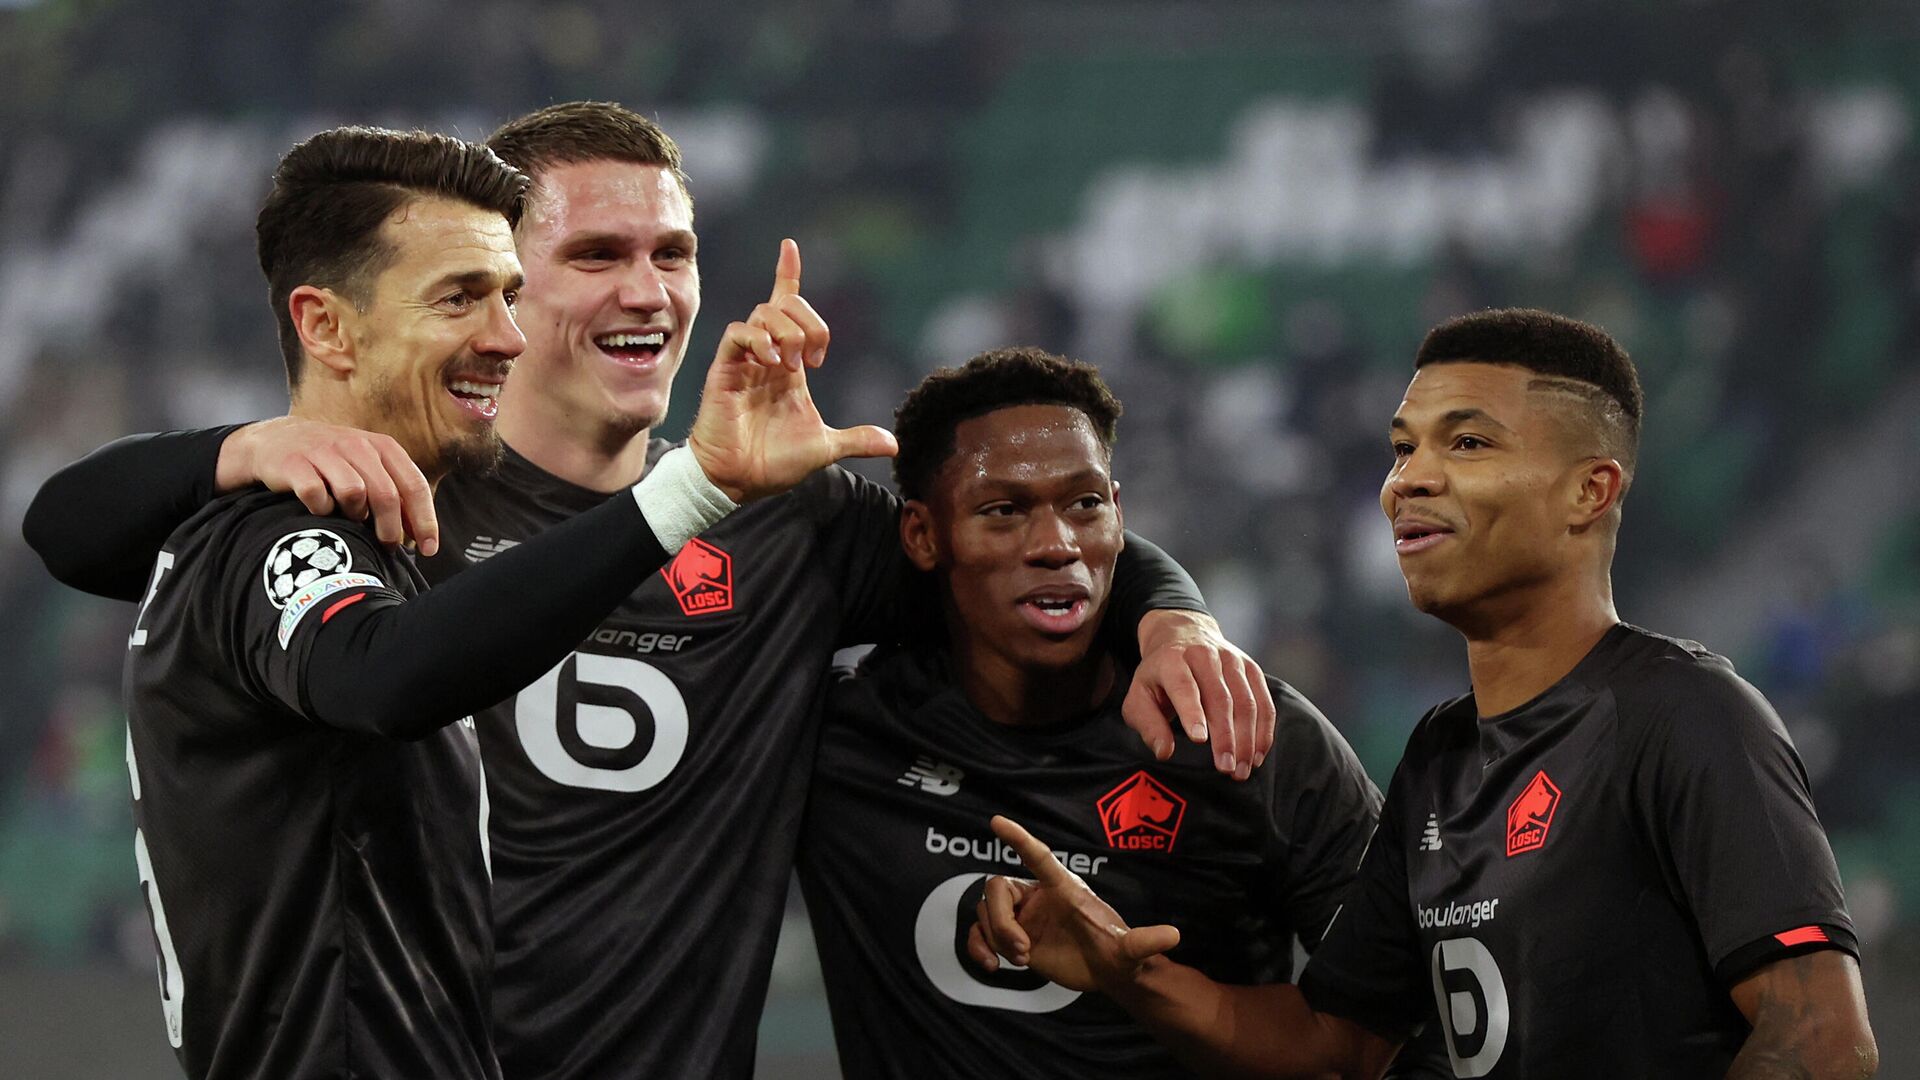 (L-R) Lille's Portuguese defender Jose Fonte, Lille's Dutch defender Sven Botman, Lille's Canadian forward Jonathan David and Lille's Mozambican defender Reinildo Mandava celebrate scoring during the UEFA Champions League group G football match VfL Wolfsburg v Lille LOSC in Wolfsburg, northern Germany on December 8, 2021. (Photo by Ronny HARTMANN / AFP) - РИА Новости, 1920, 09.12.2021